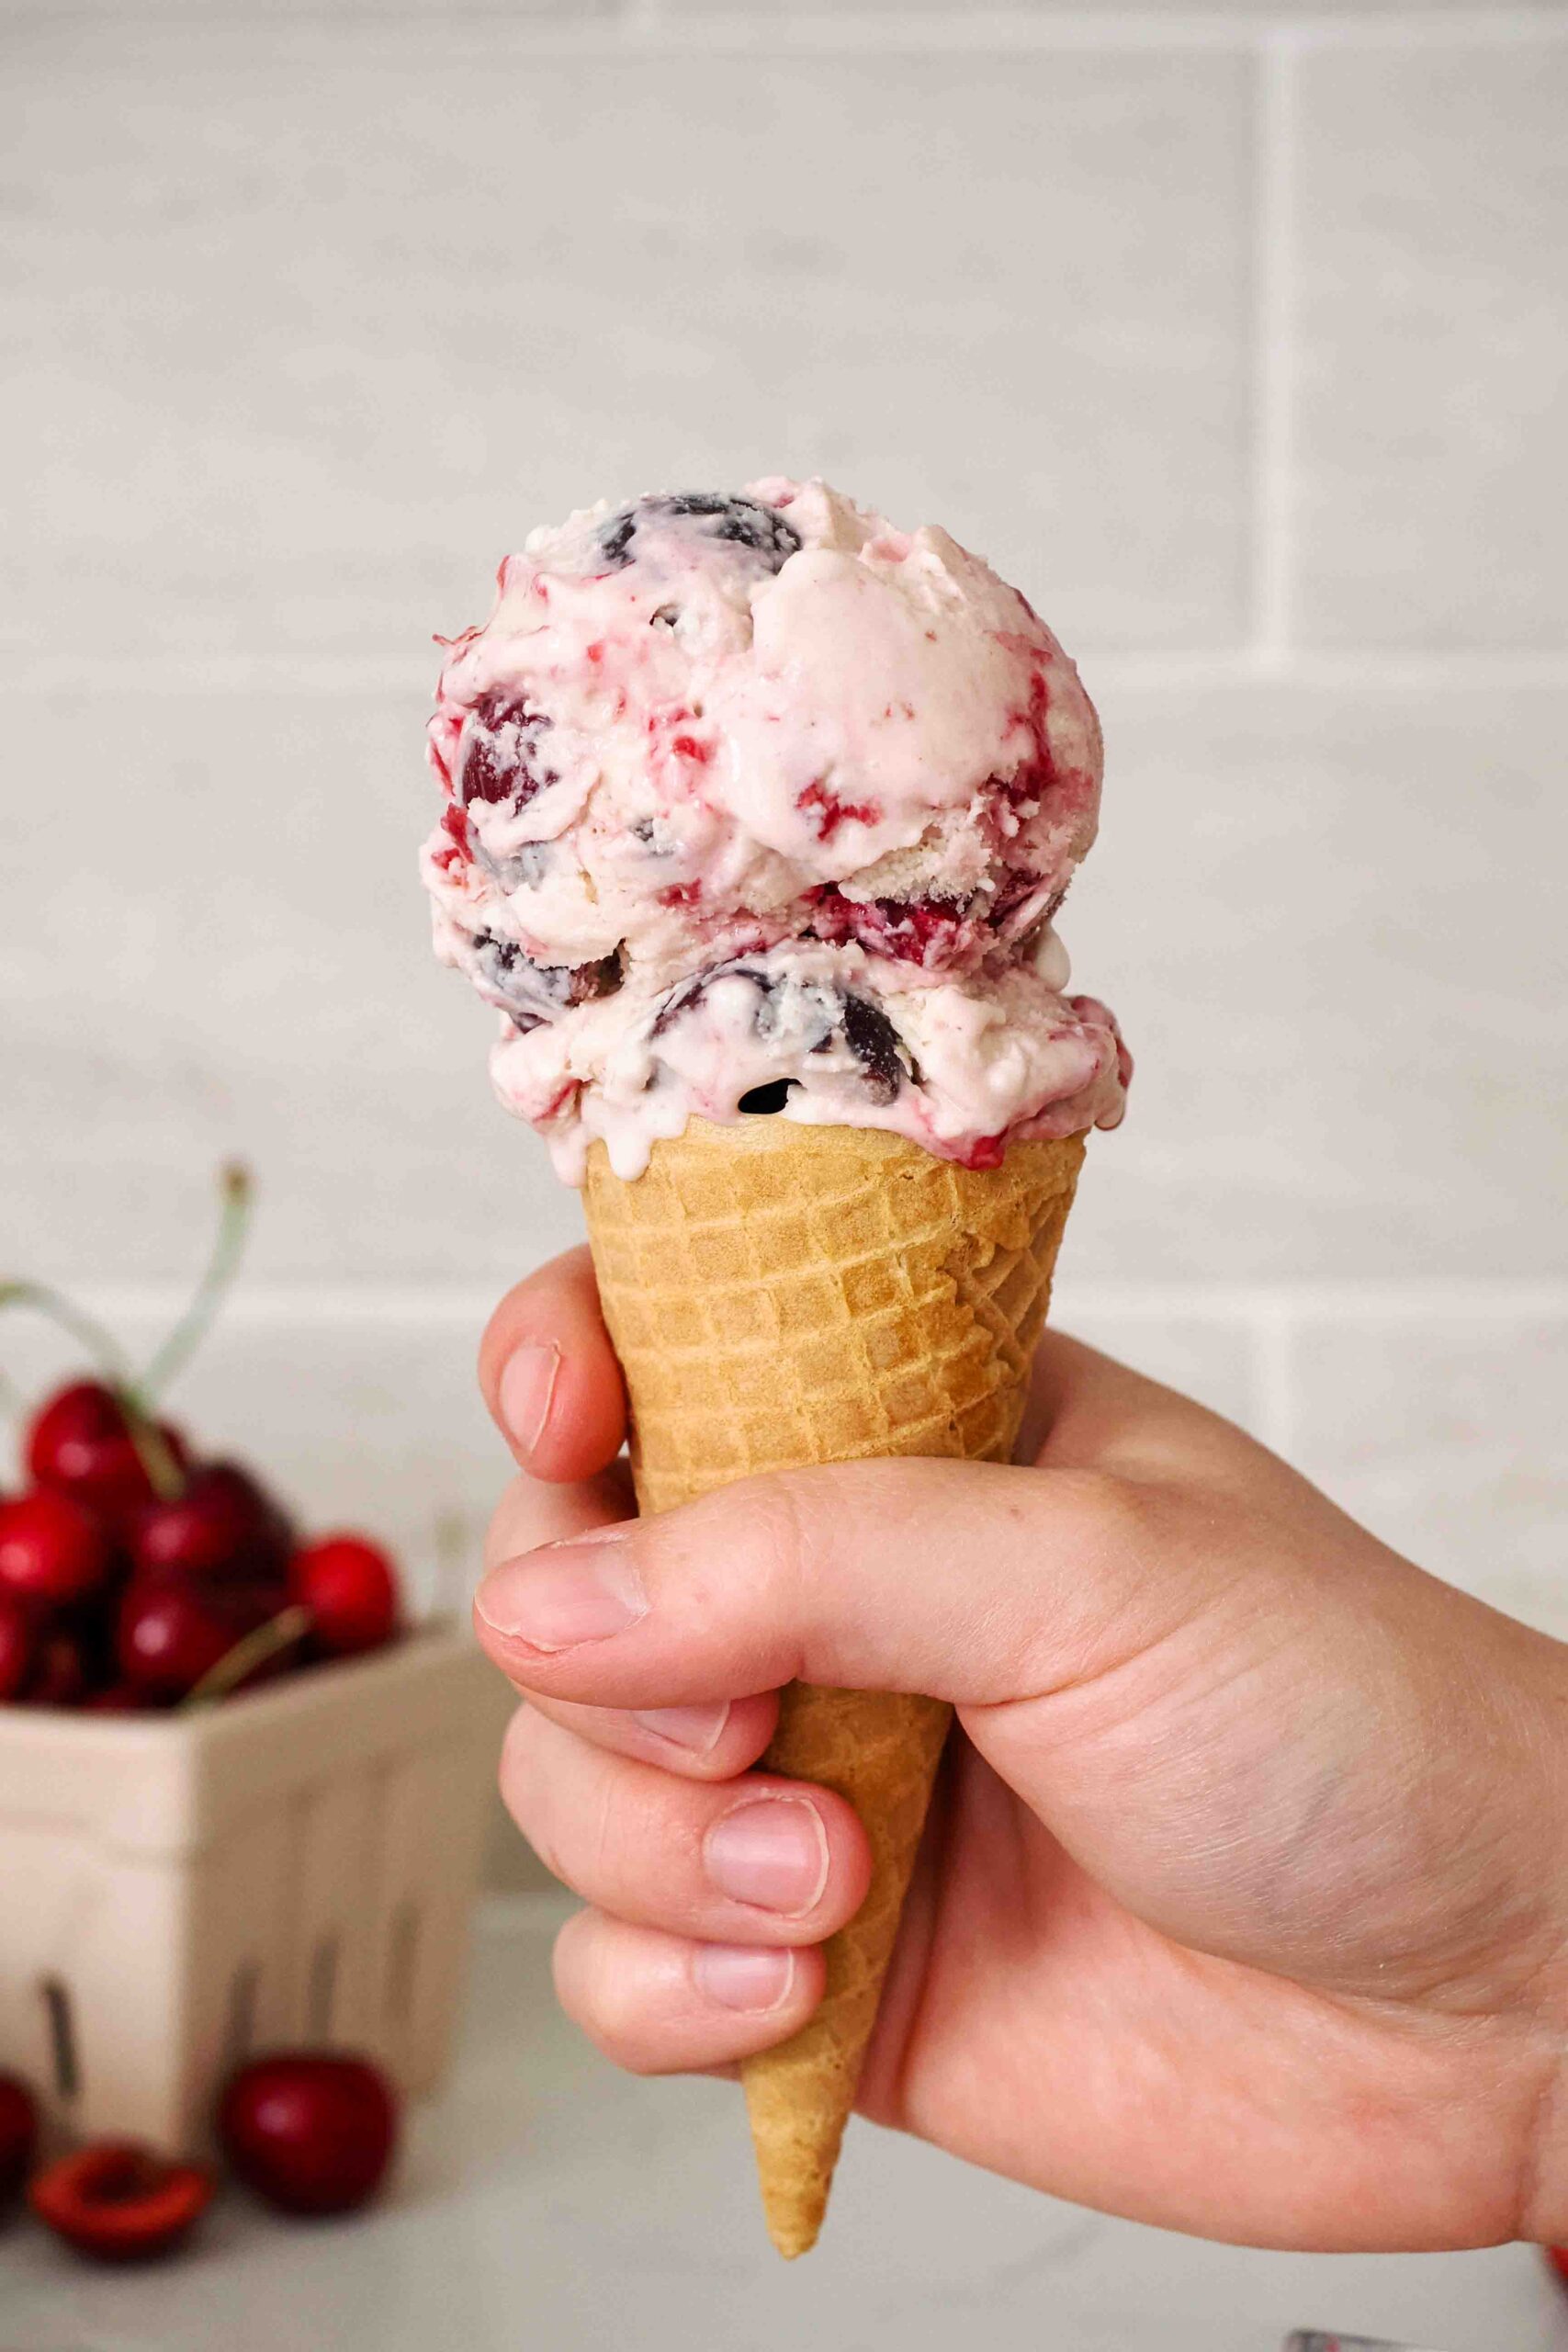 A hand holds a double scooped cone of black cherry ice cream.